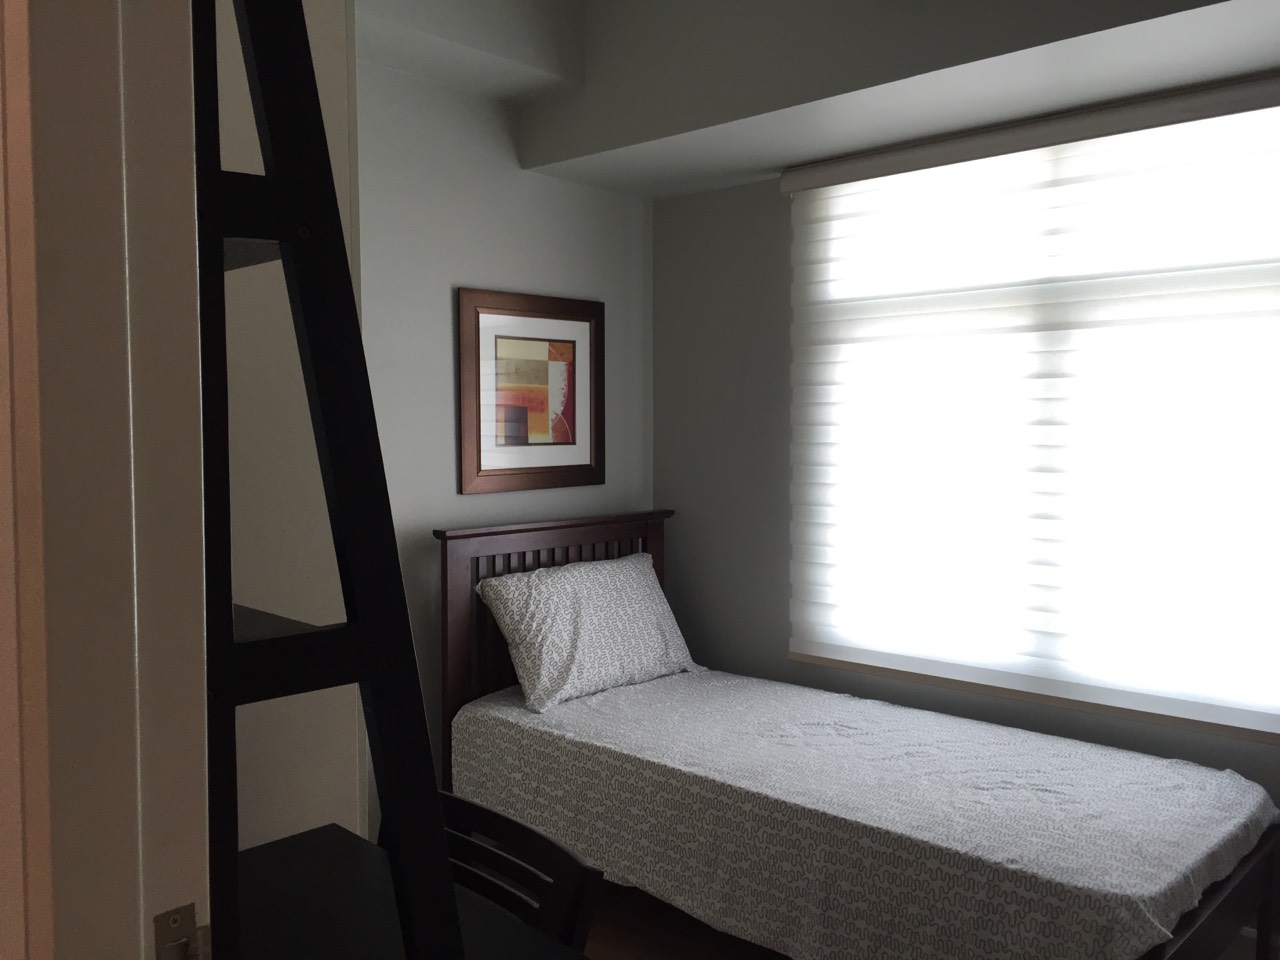 2BR Condo For Rent, Red Oak at Two Serendra, Taguig City